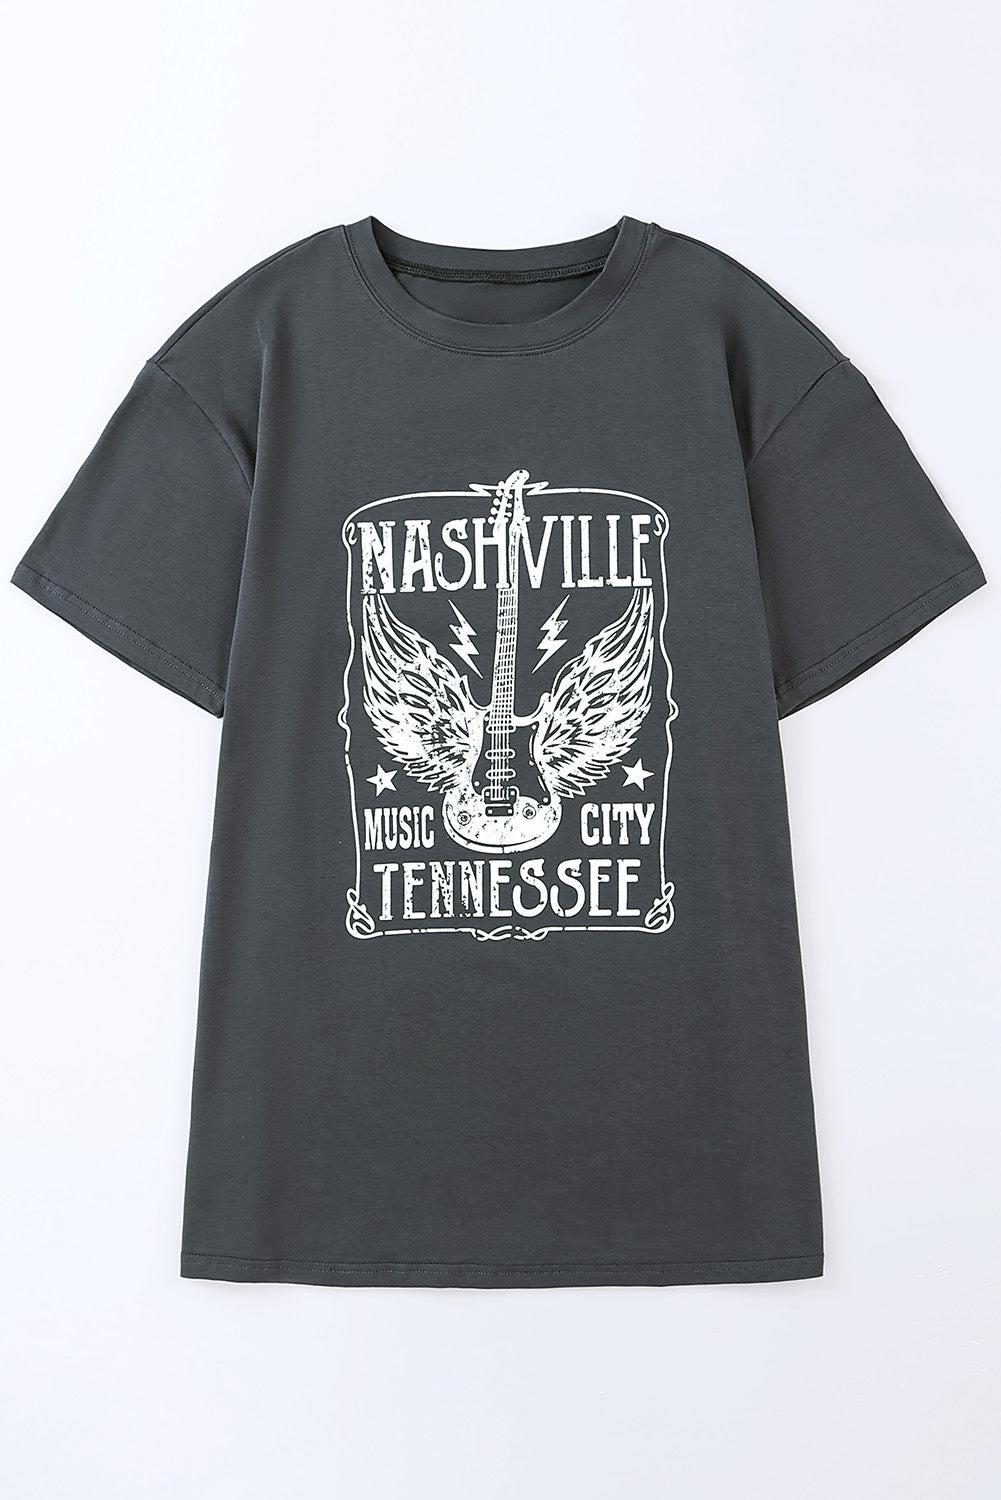 NASHVILLE MUSIC CITY TENNESSEE Graphic T-Shirt BLUE ZONE PLANET